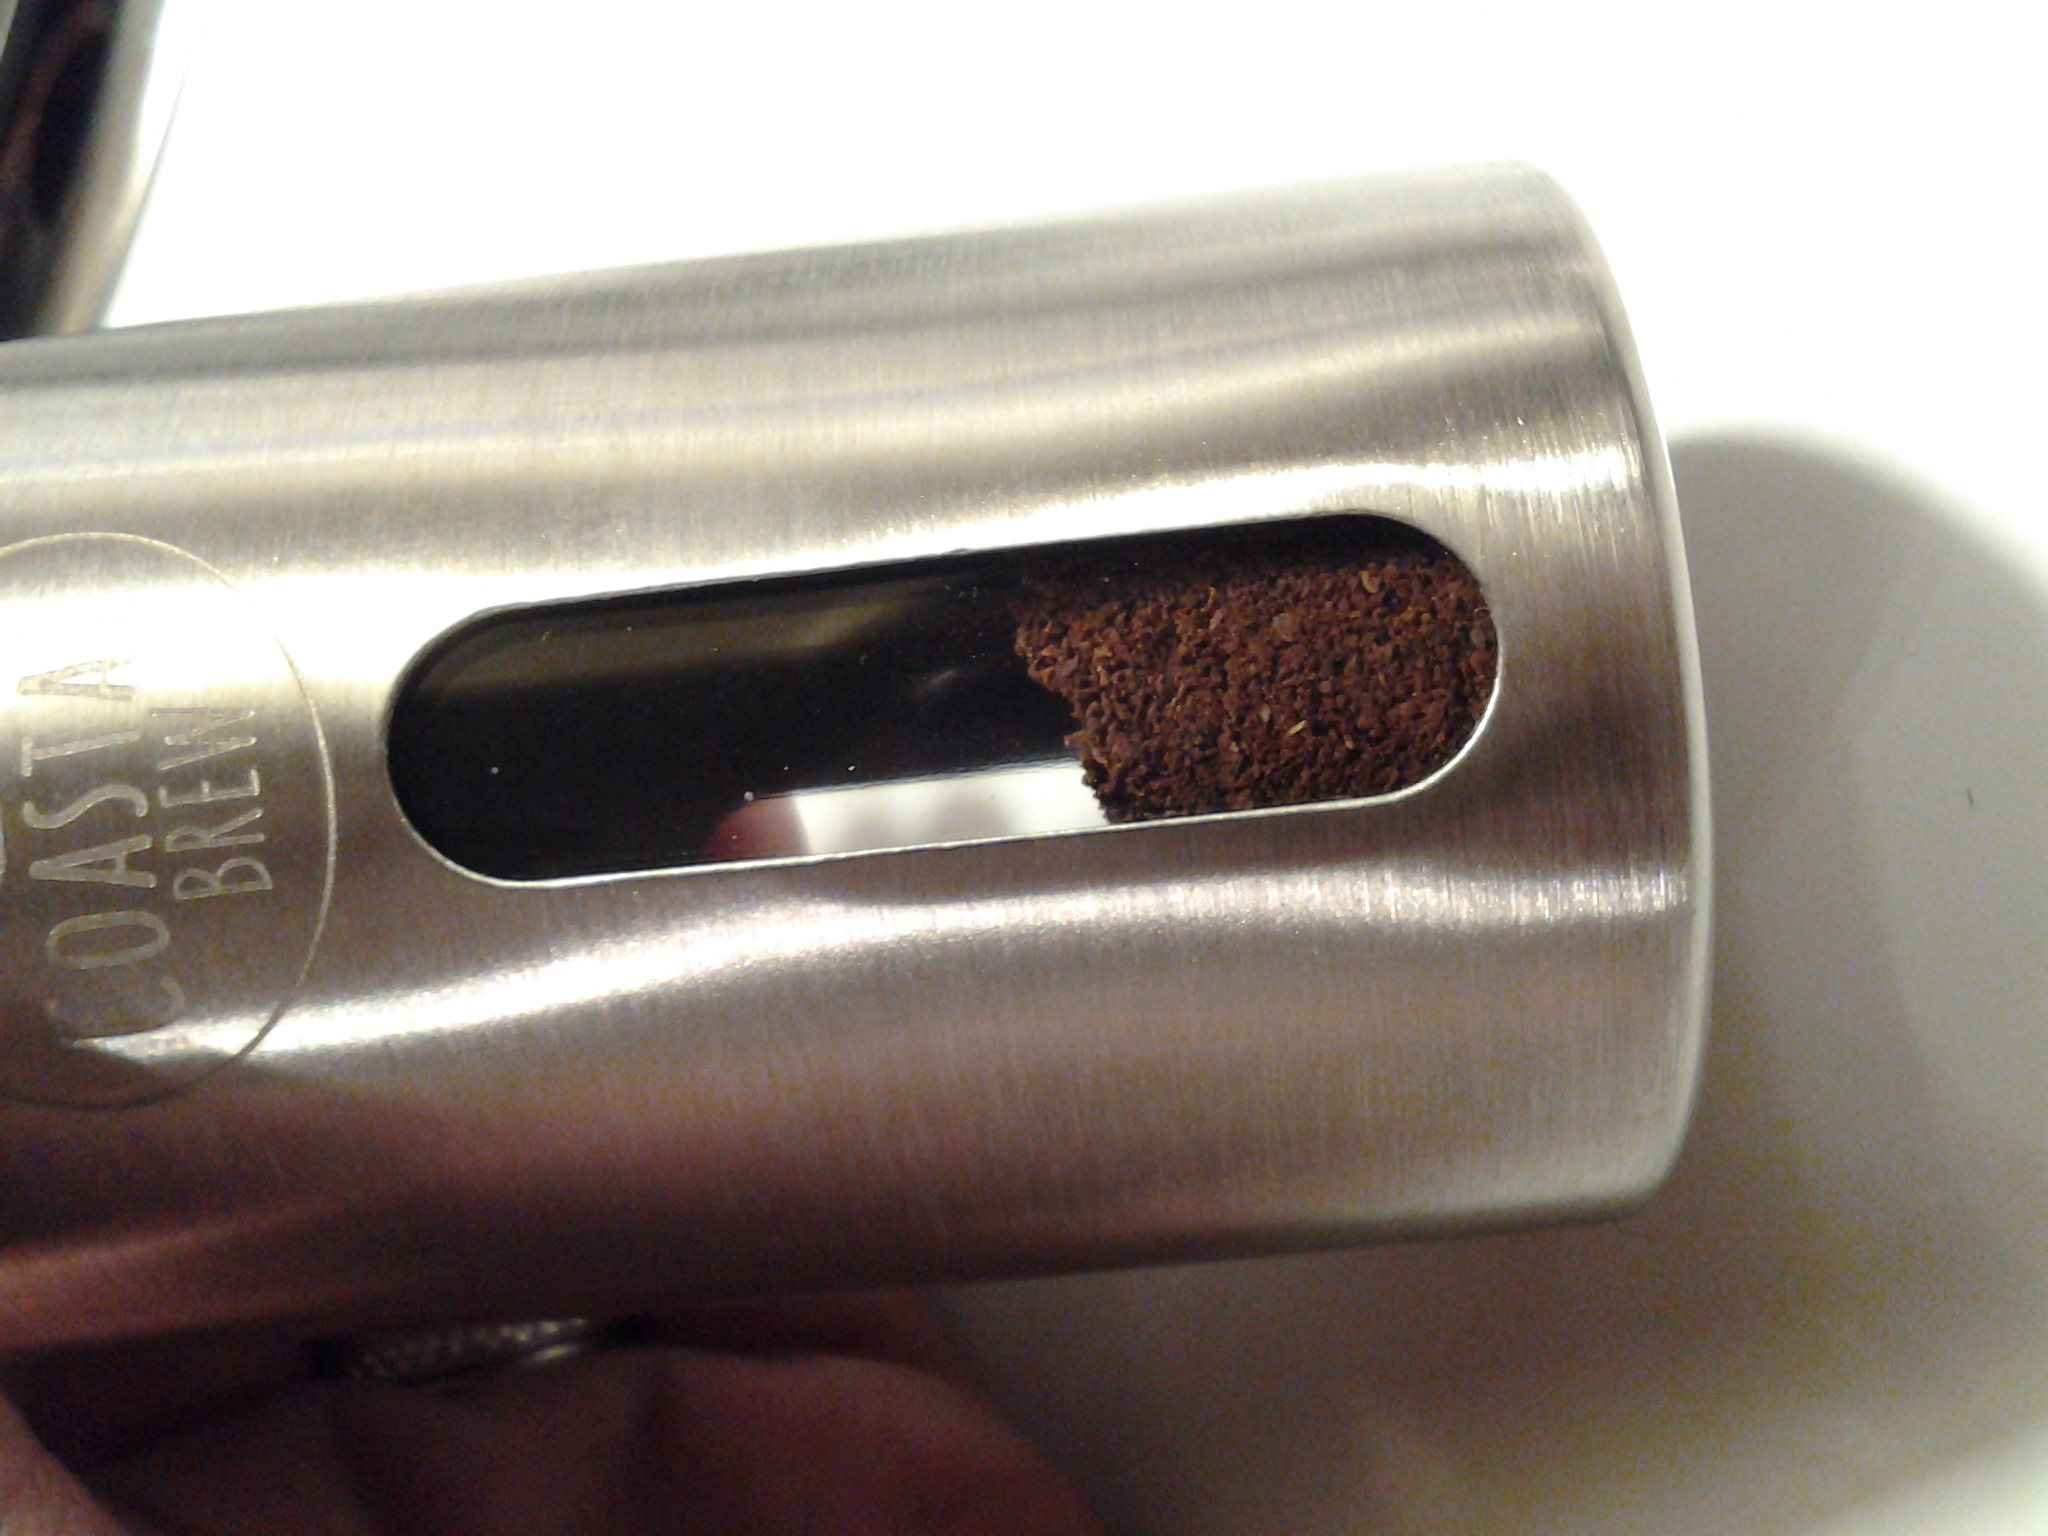 Mother inlaw Loves this cofee grinder